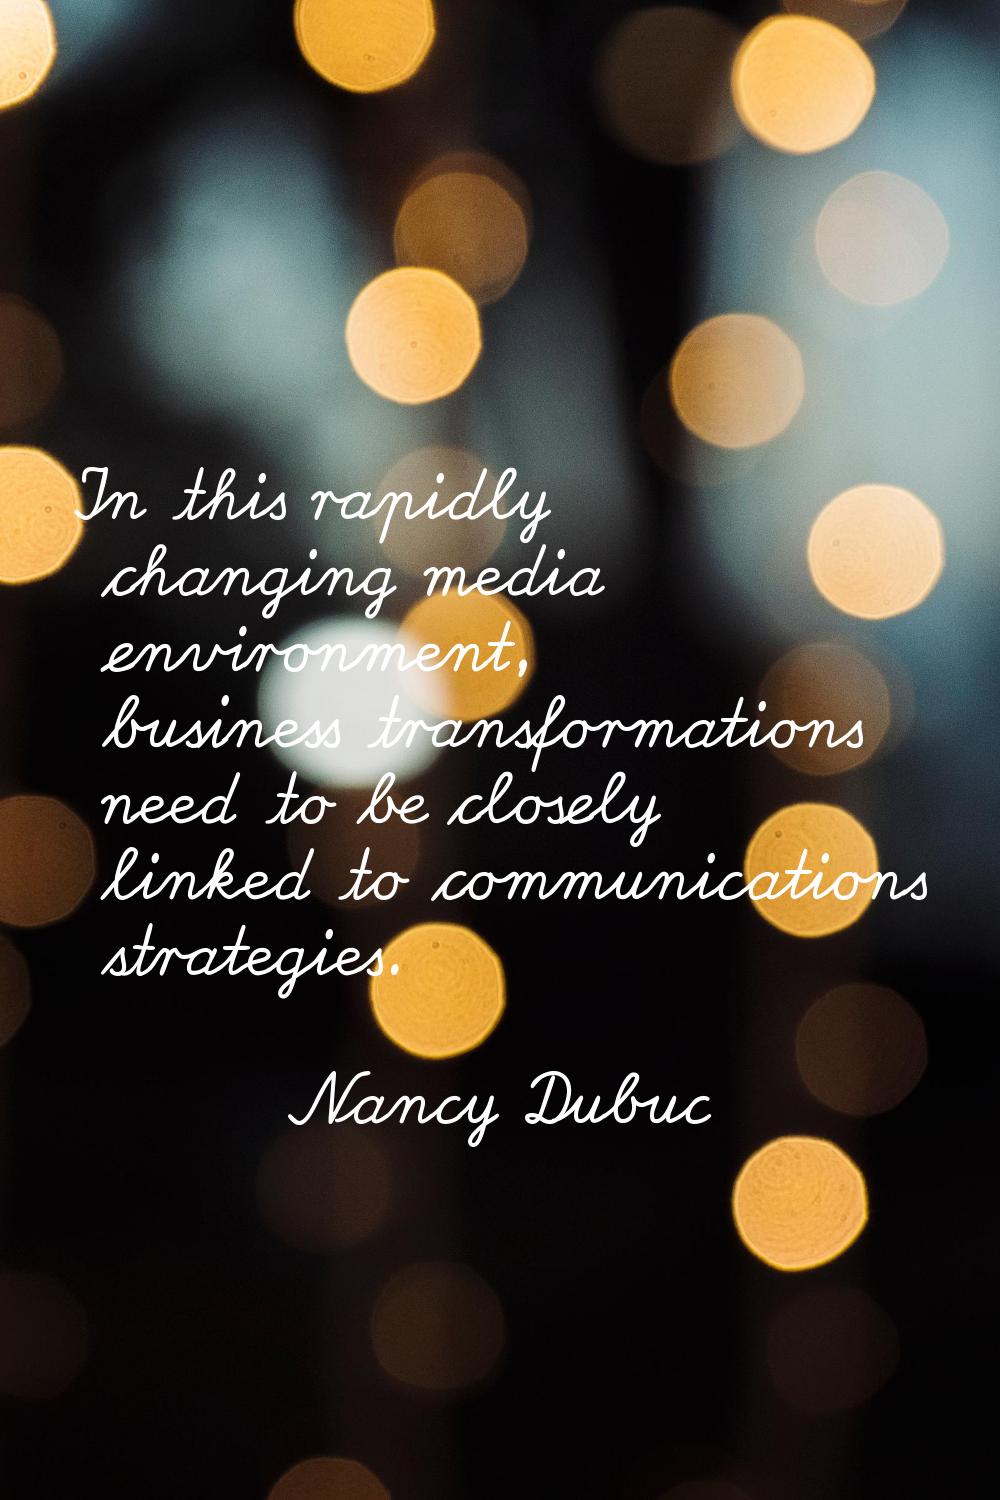 In this rapidly changing media environment, business transformations need to be closely linked to c